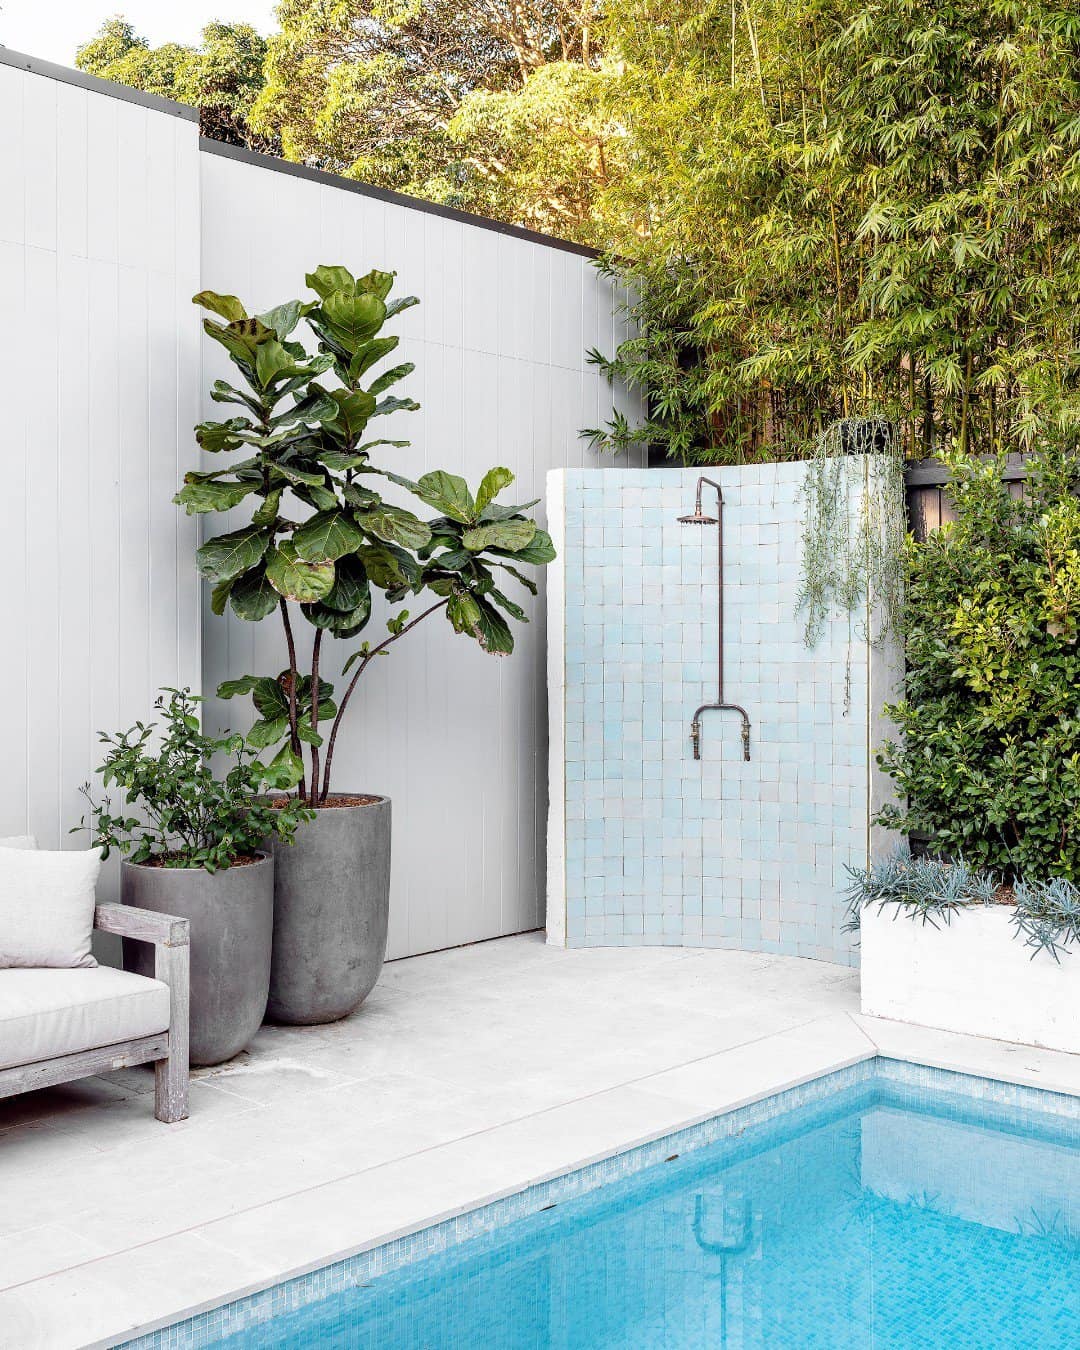 A serene outdoor shower area with white mosaic tiles next to a swimming pool, surrounded by lush greenery and two large planters with a tropical plant and a small tree, perfect for a cool-off.